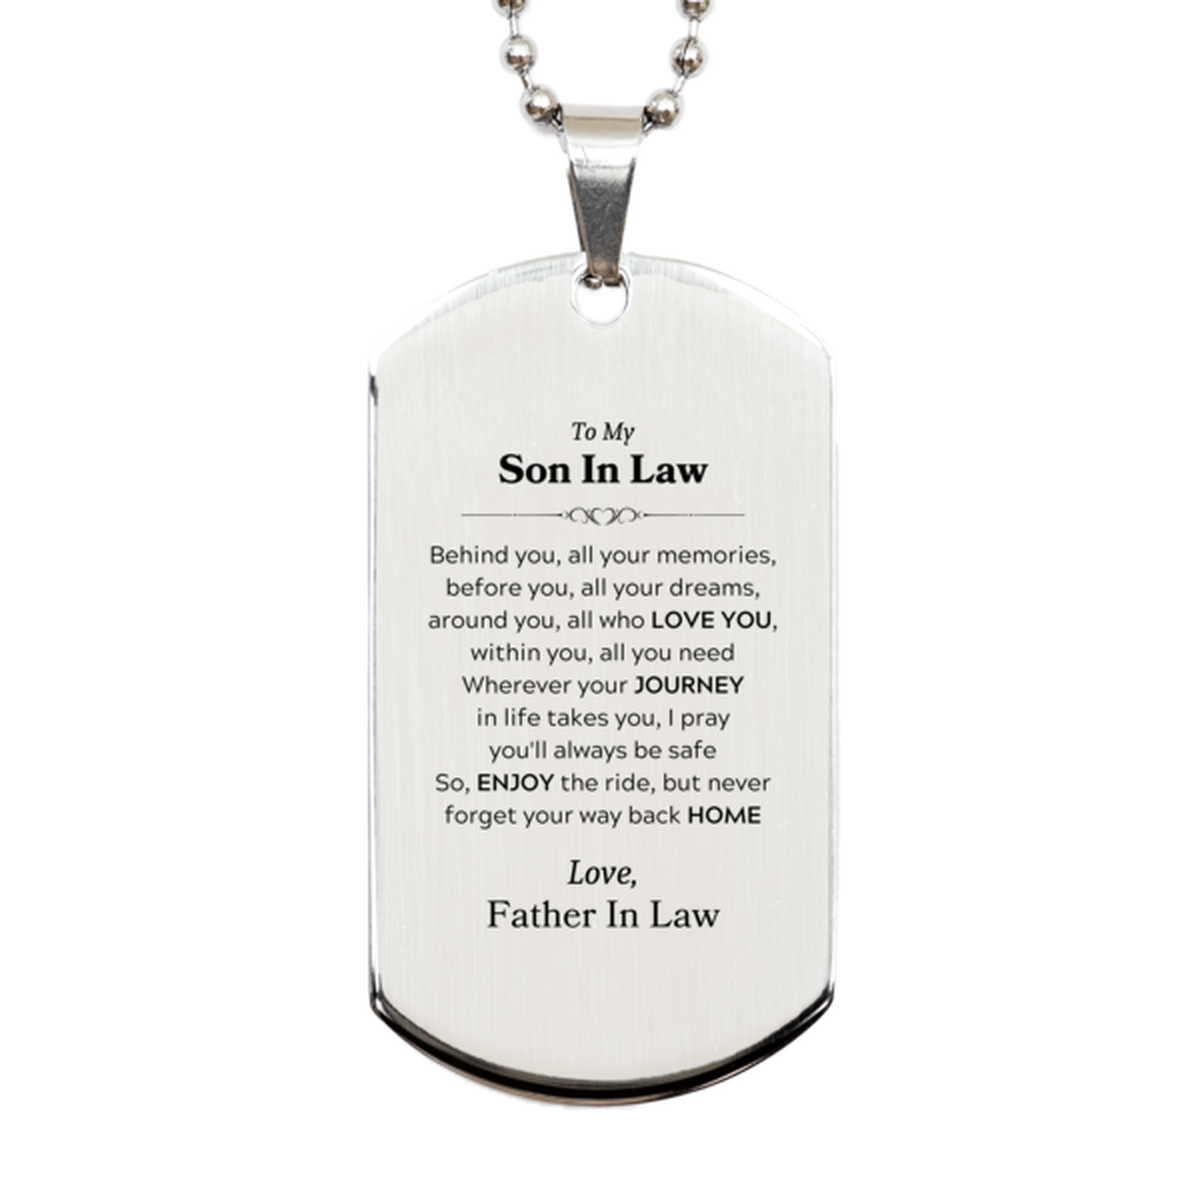 To My Son In Law Graduation Gifts from Father In Law, Son In Law Silver Dog Tag Christmas Birthday Gifts for Son In Law Behind you, all your memories, before you, all your dreams. Love, Father In Law